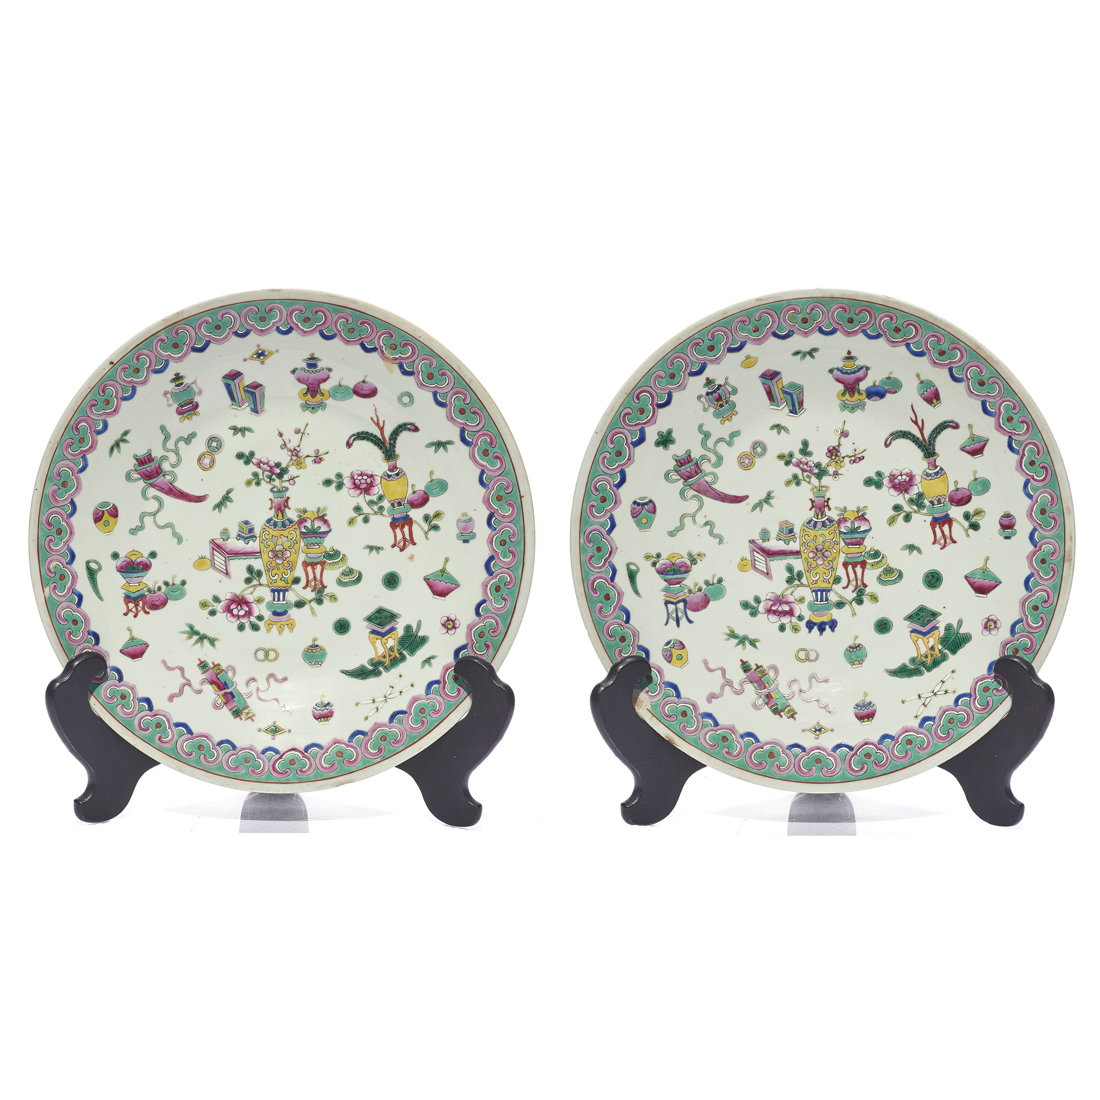 PAIR OF CHINESE FAMILLE ROSE CHARGERS 3a2a43